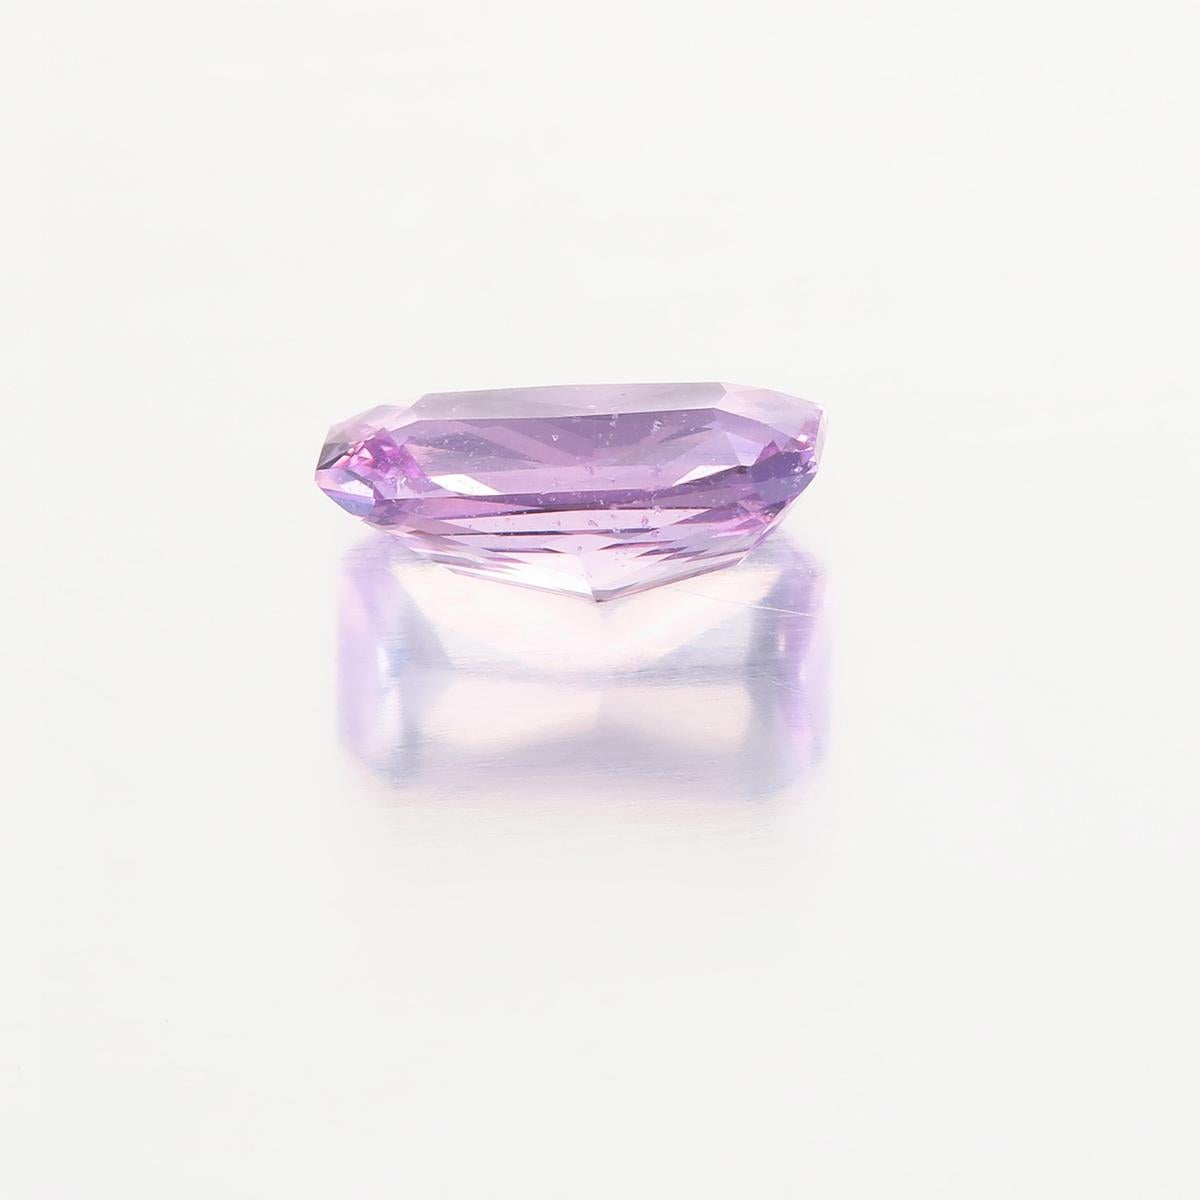 Octagon Cut 1.03 Carat Pink Sapphire from Madagascar Lotus Certified No Heat For Sale